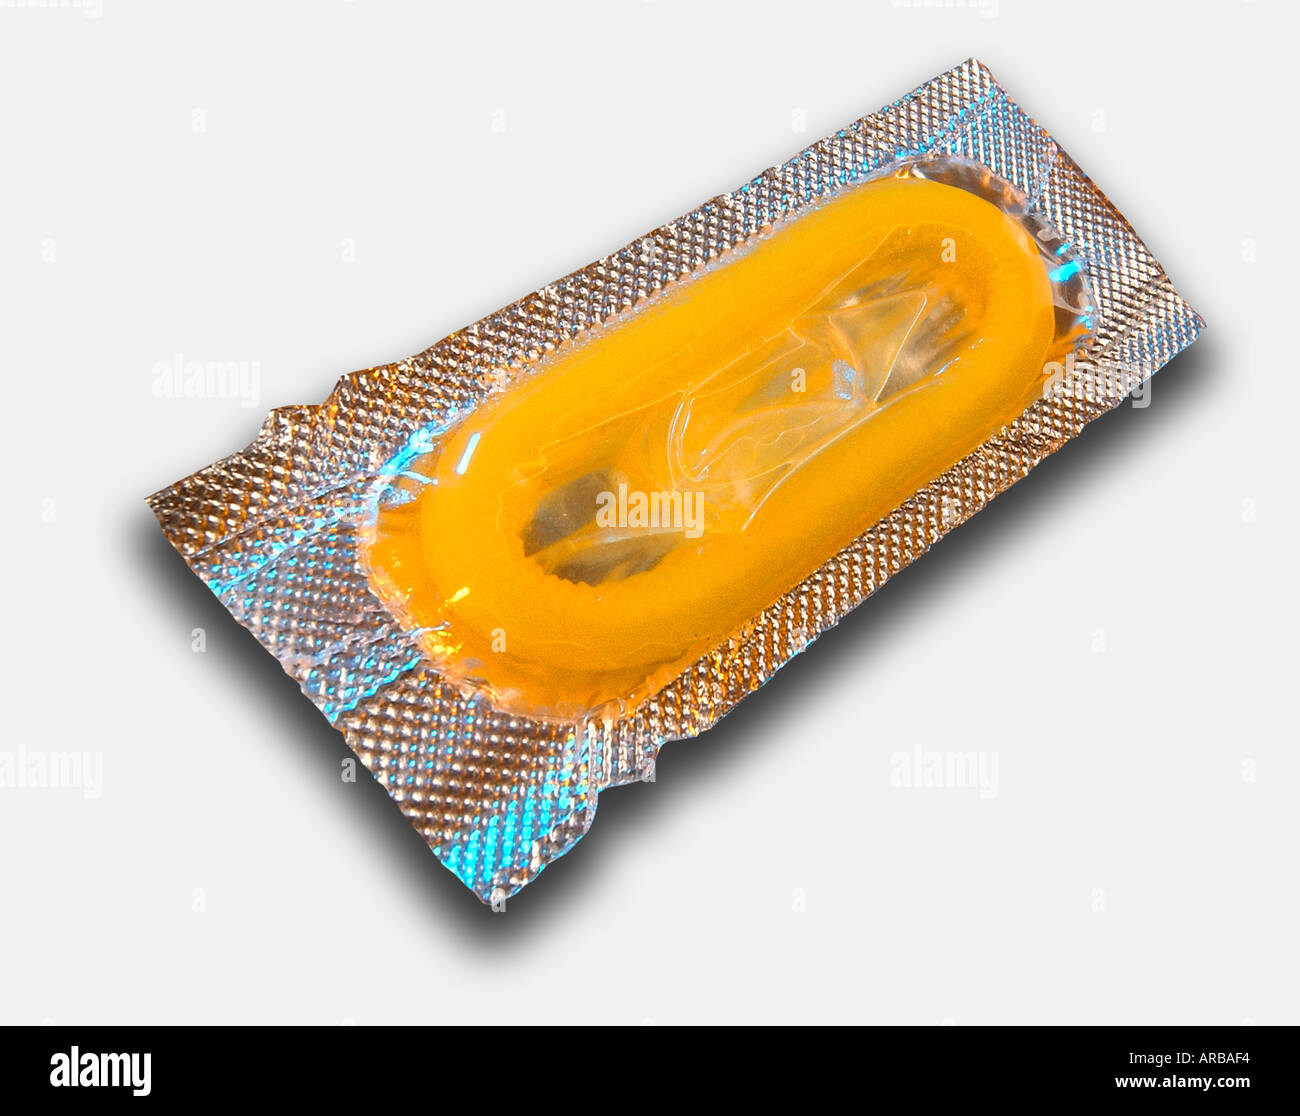 SINGLE YELLOW CONDOM IN FOIL WRAPPER ON WHITE BACKGROUND Stock Photo - Alamy